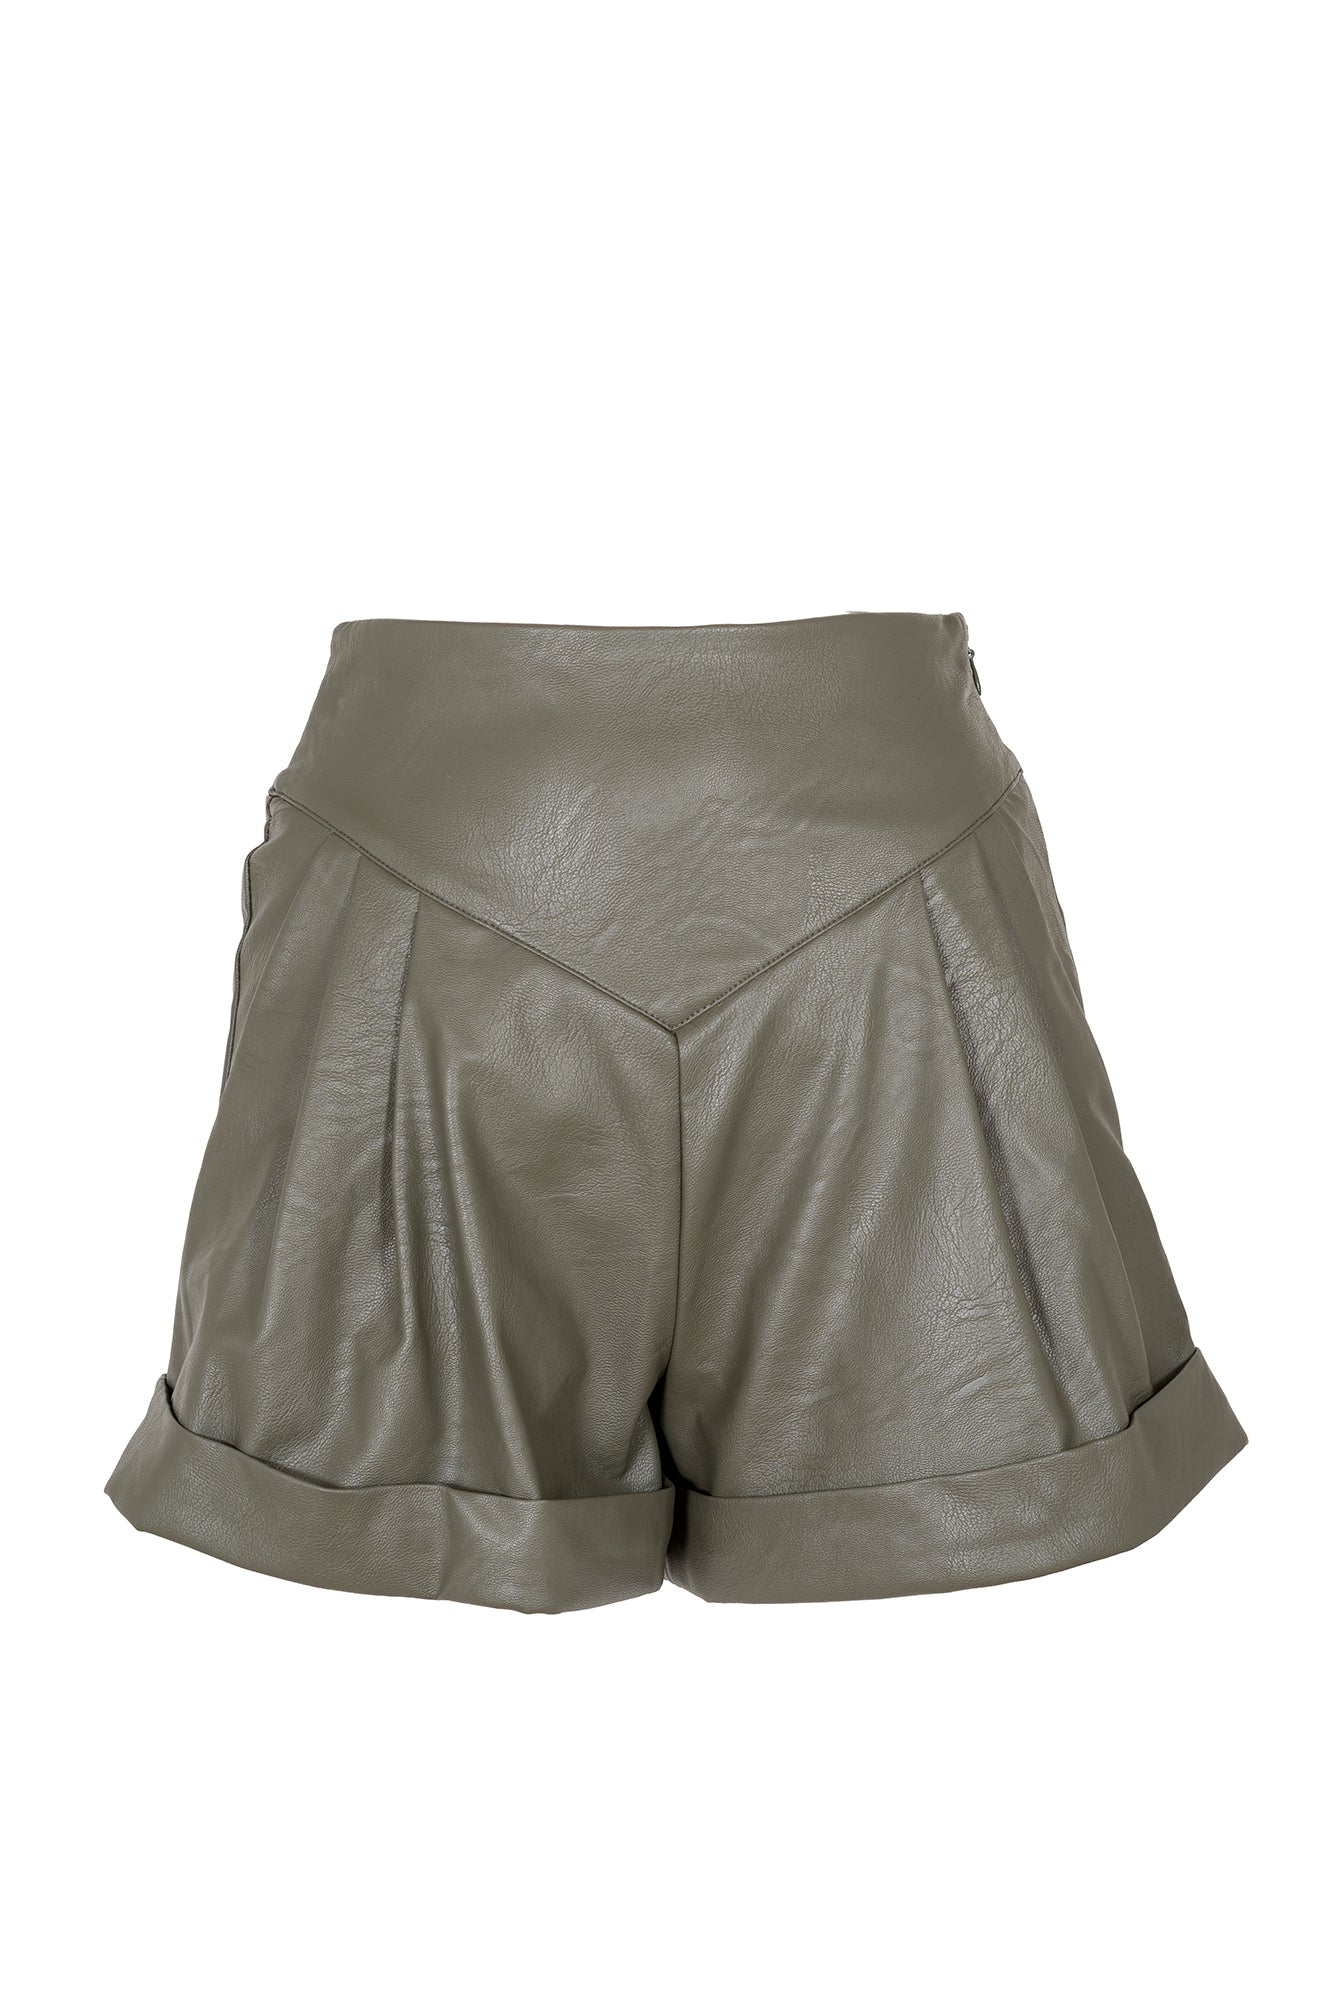 Faux leather military shorts with darts